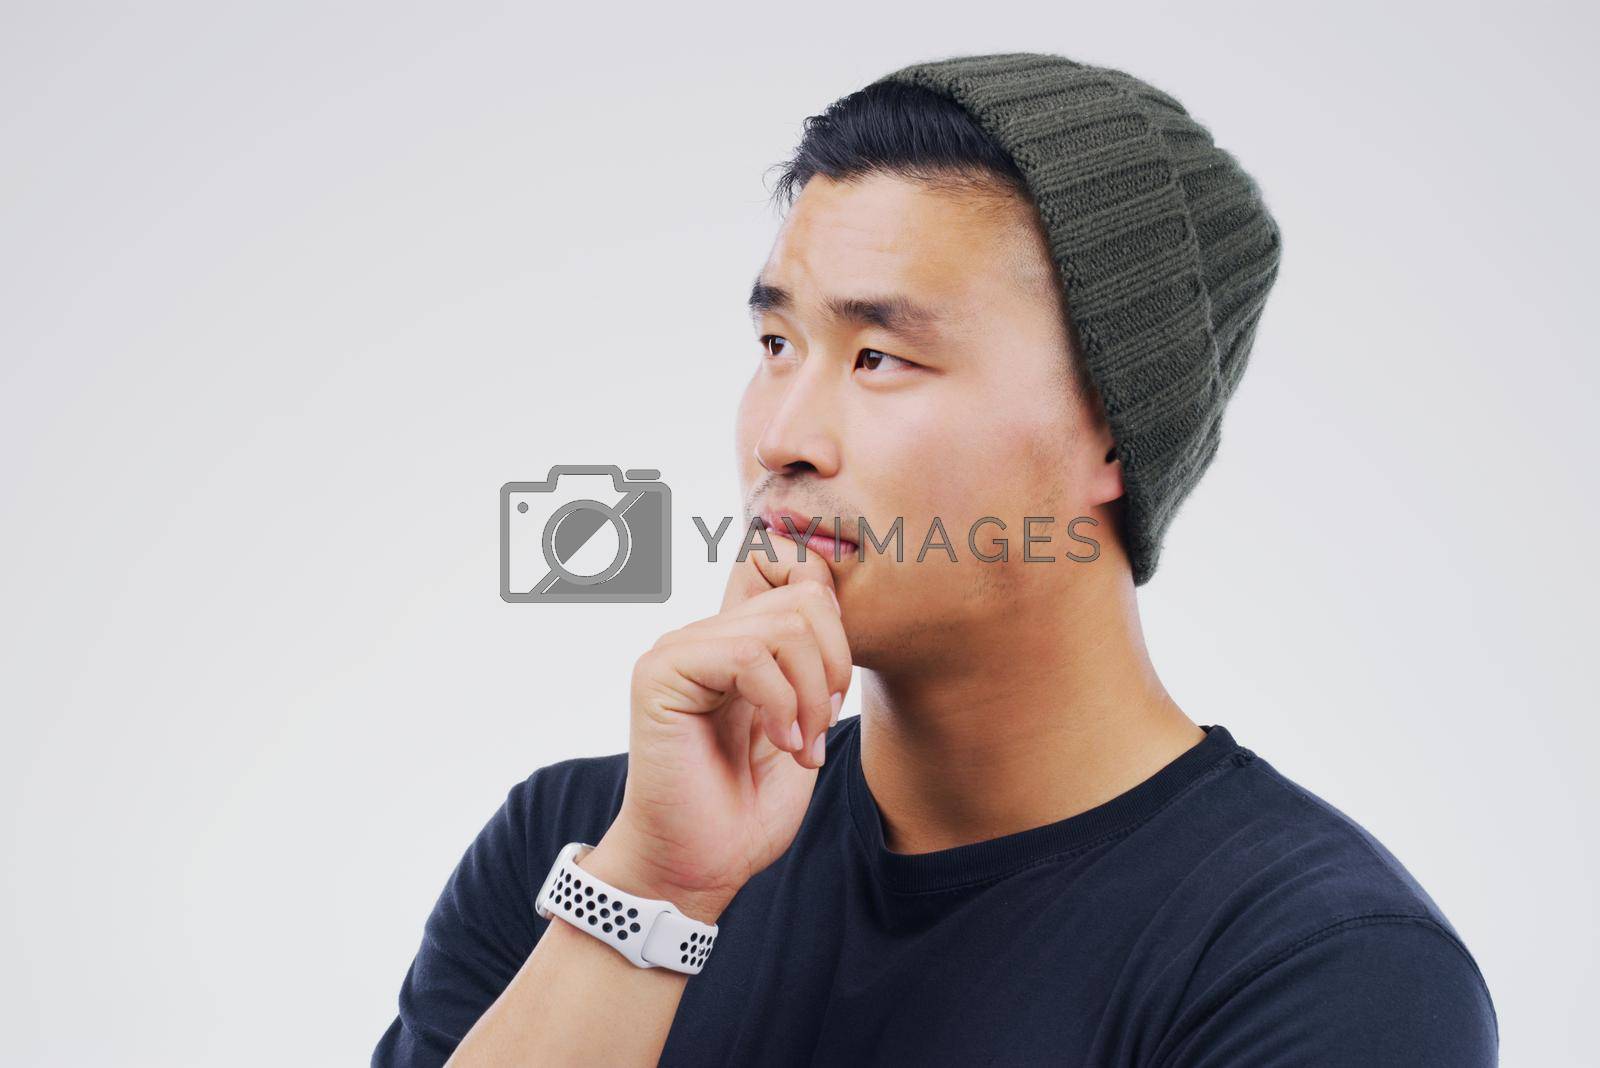 Royalty free image of Im thinking more clearly now. Studio shot of a man looking thoughtful against a gray background. by YuriArcurs